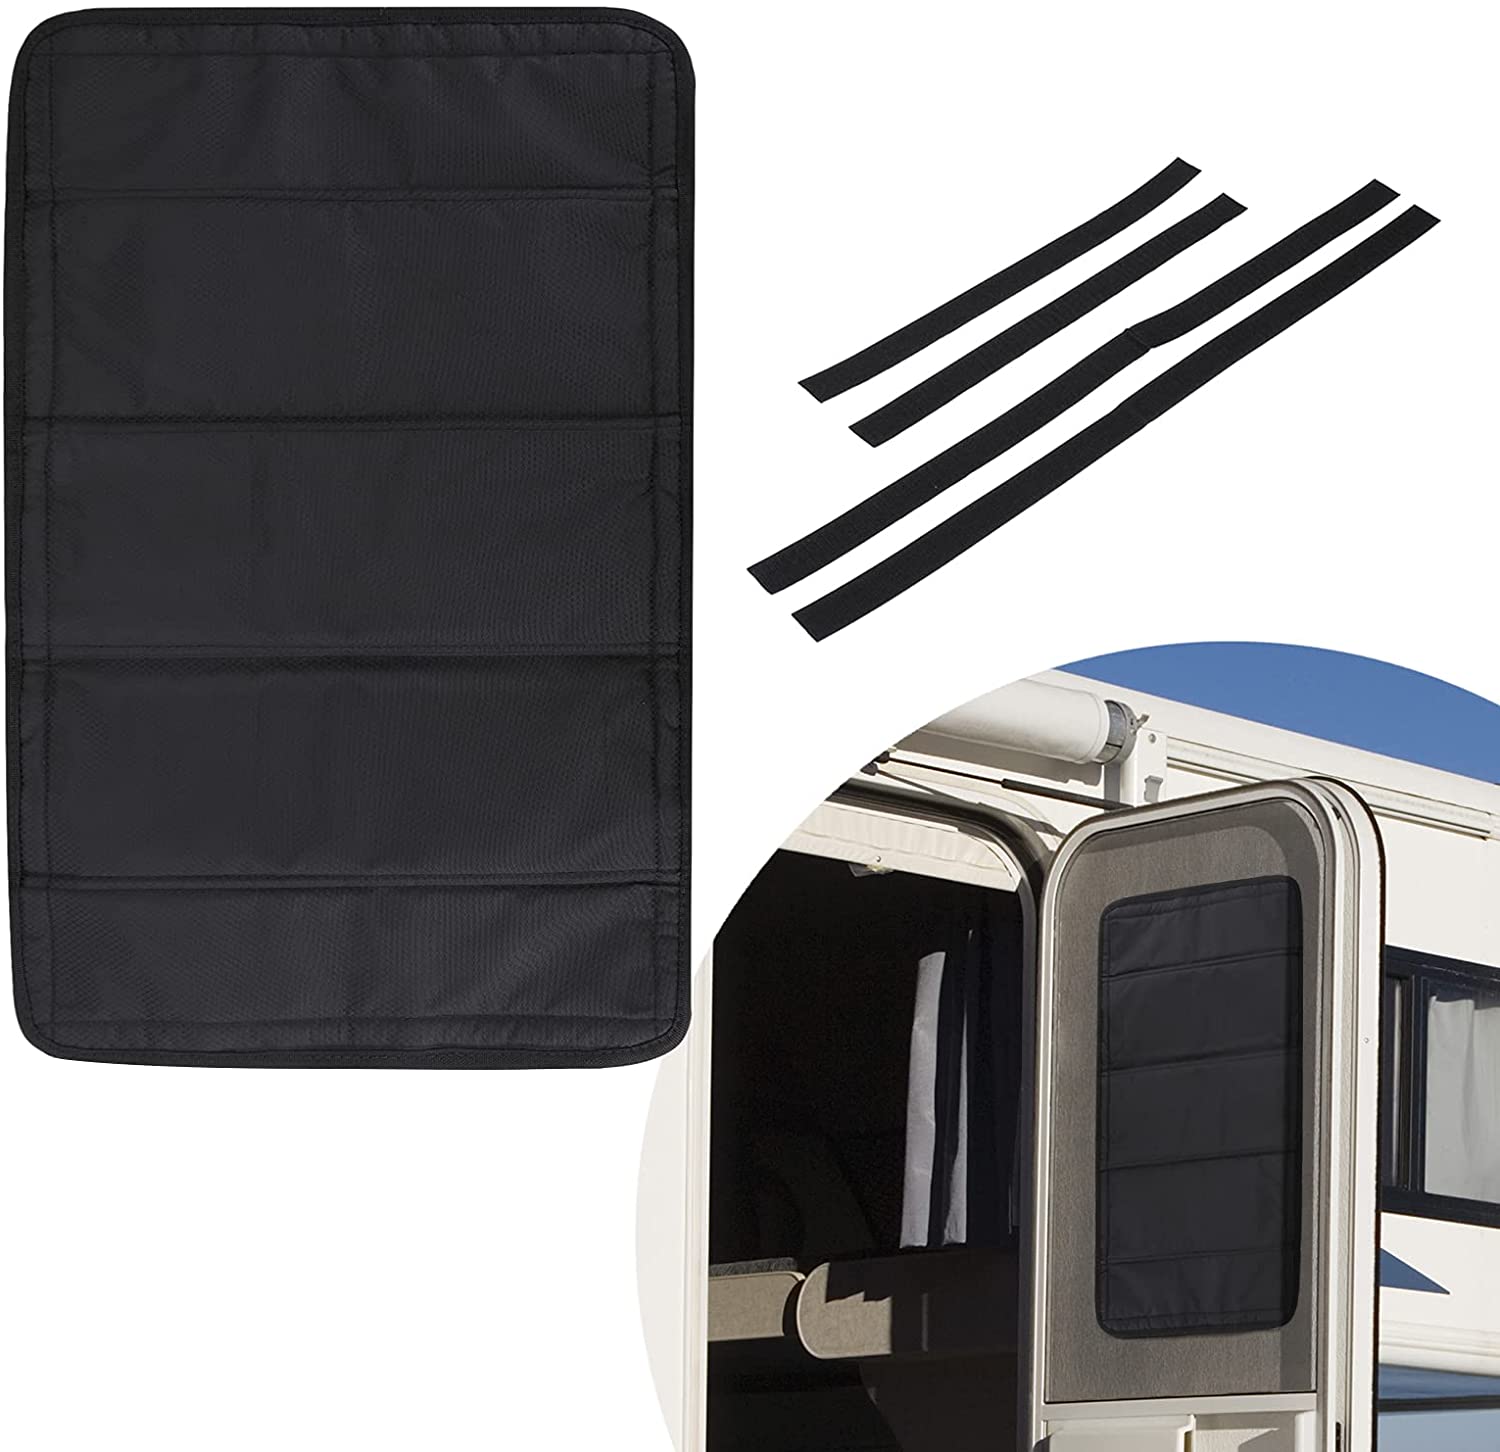 Rv Door Window Shade Cover,foldable Magnetic Rv Shade,oxford Blackout  Blocking Light,heat And Uv